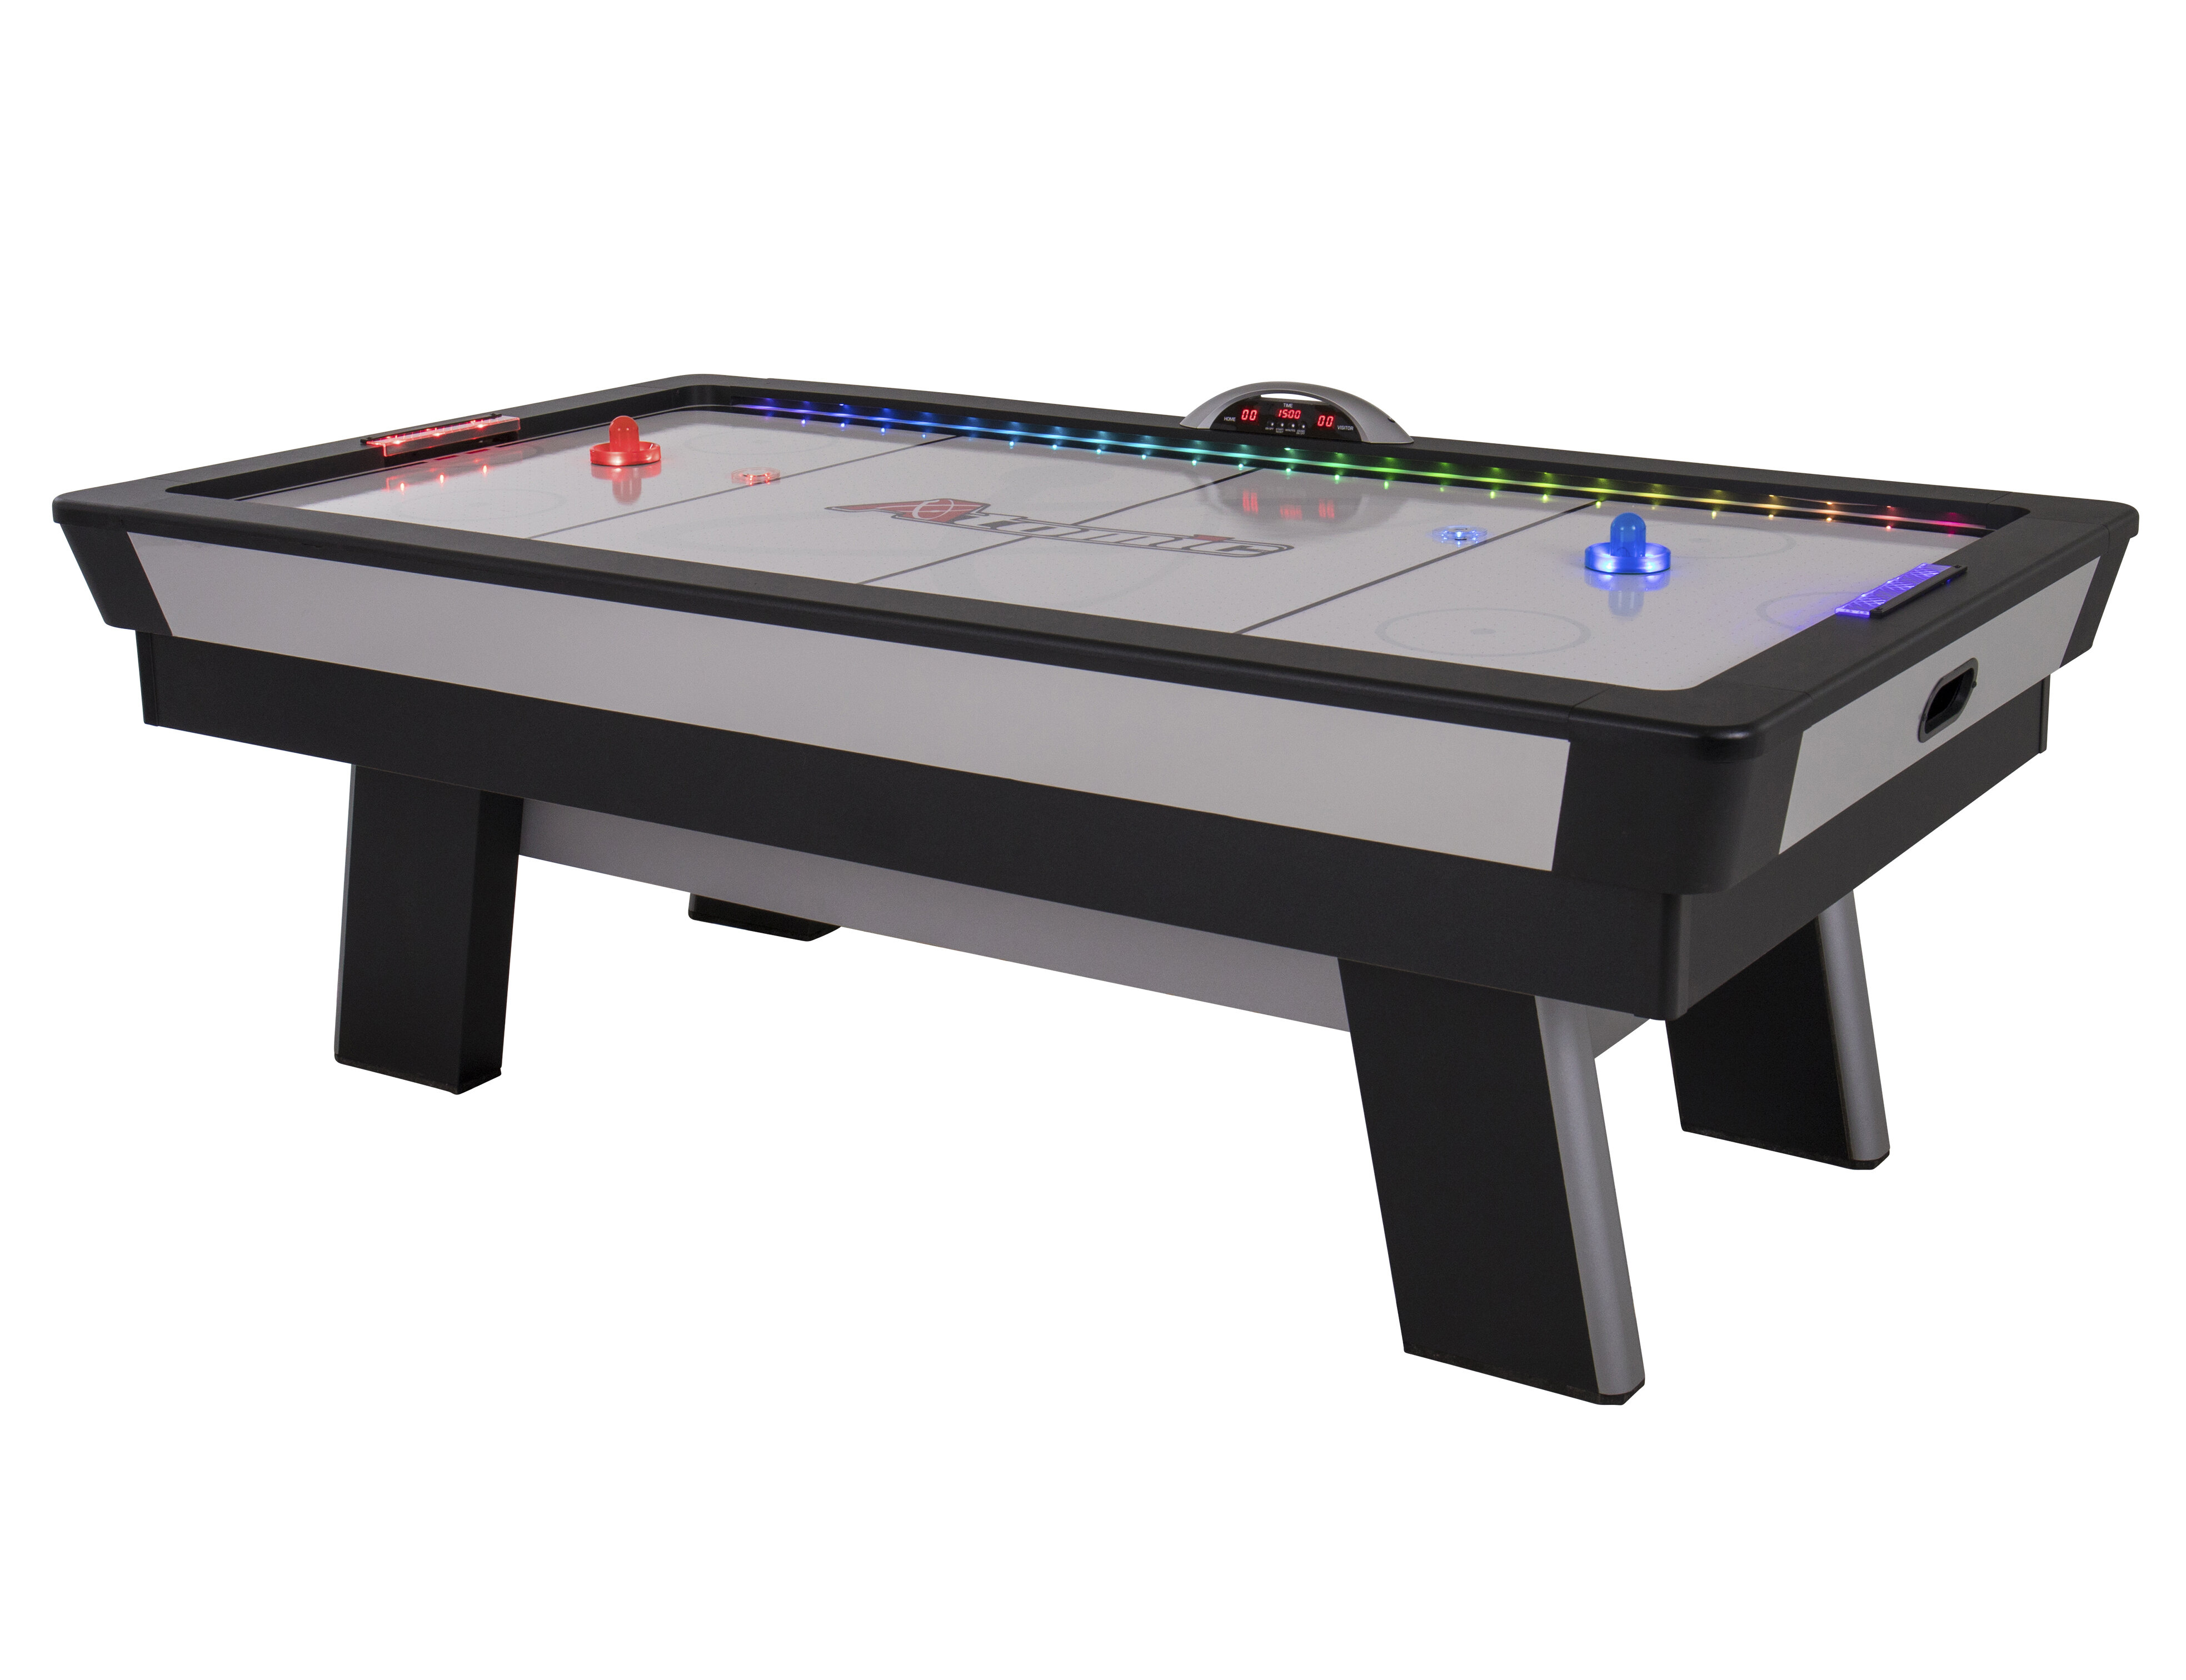 Atomic 7 5 Two Player Air Hockey Table With Digital Scoreboard